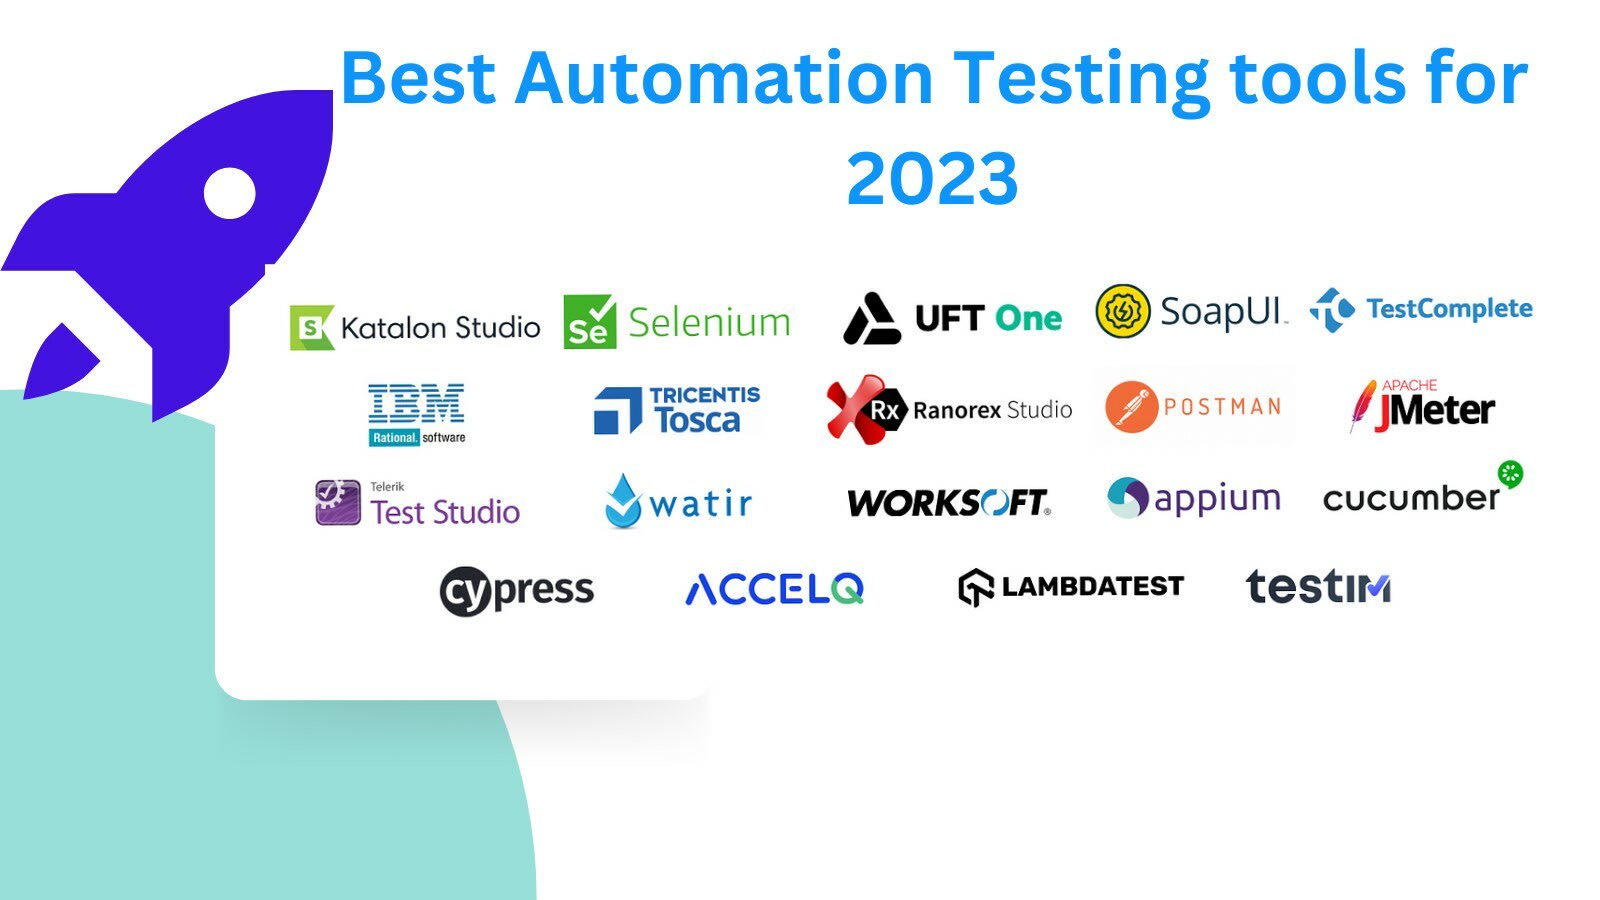 25 Best Web Application Testing Tools In 2023 - The QA Lead